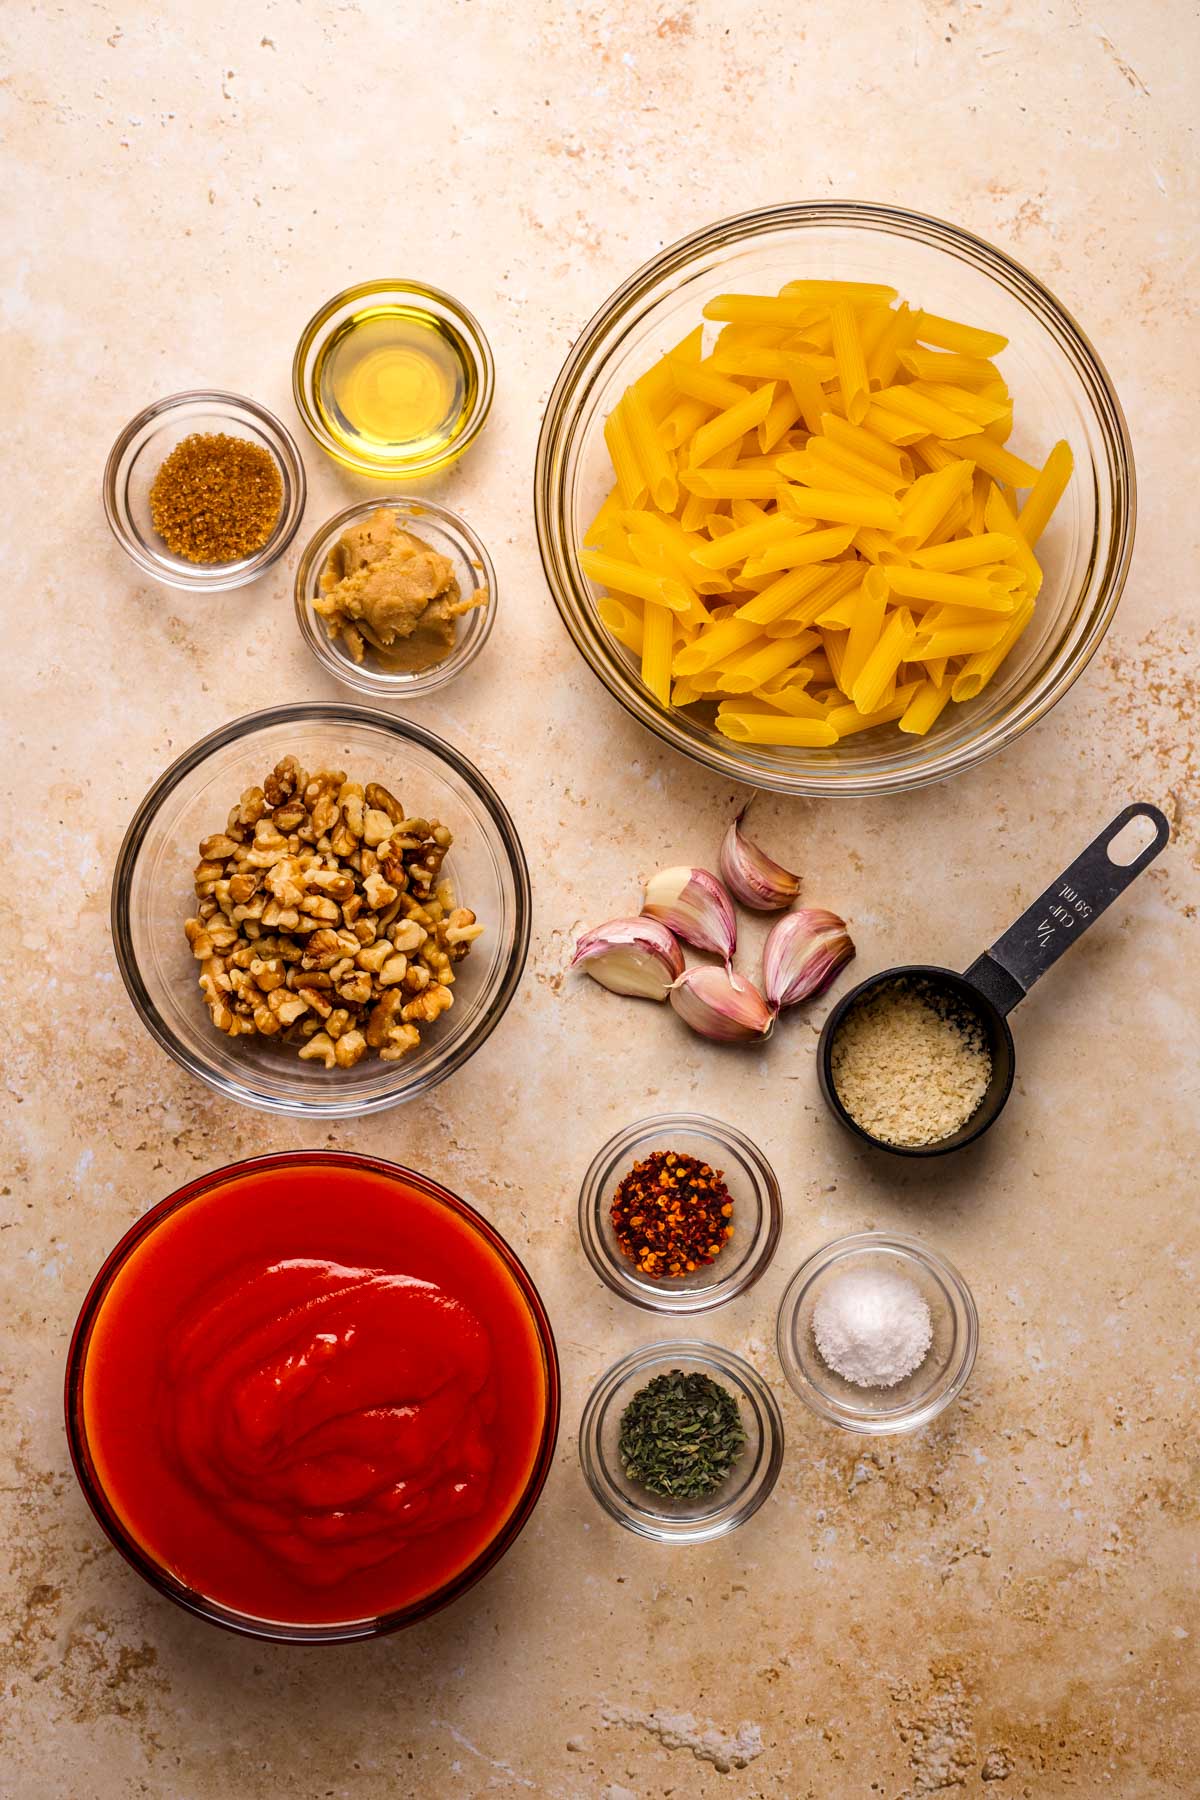 All of the ingredients to make arrabbiata sauce with penne.